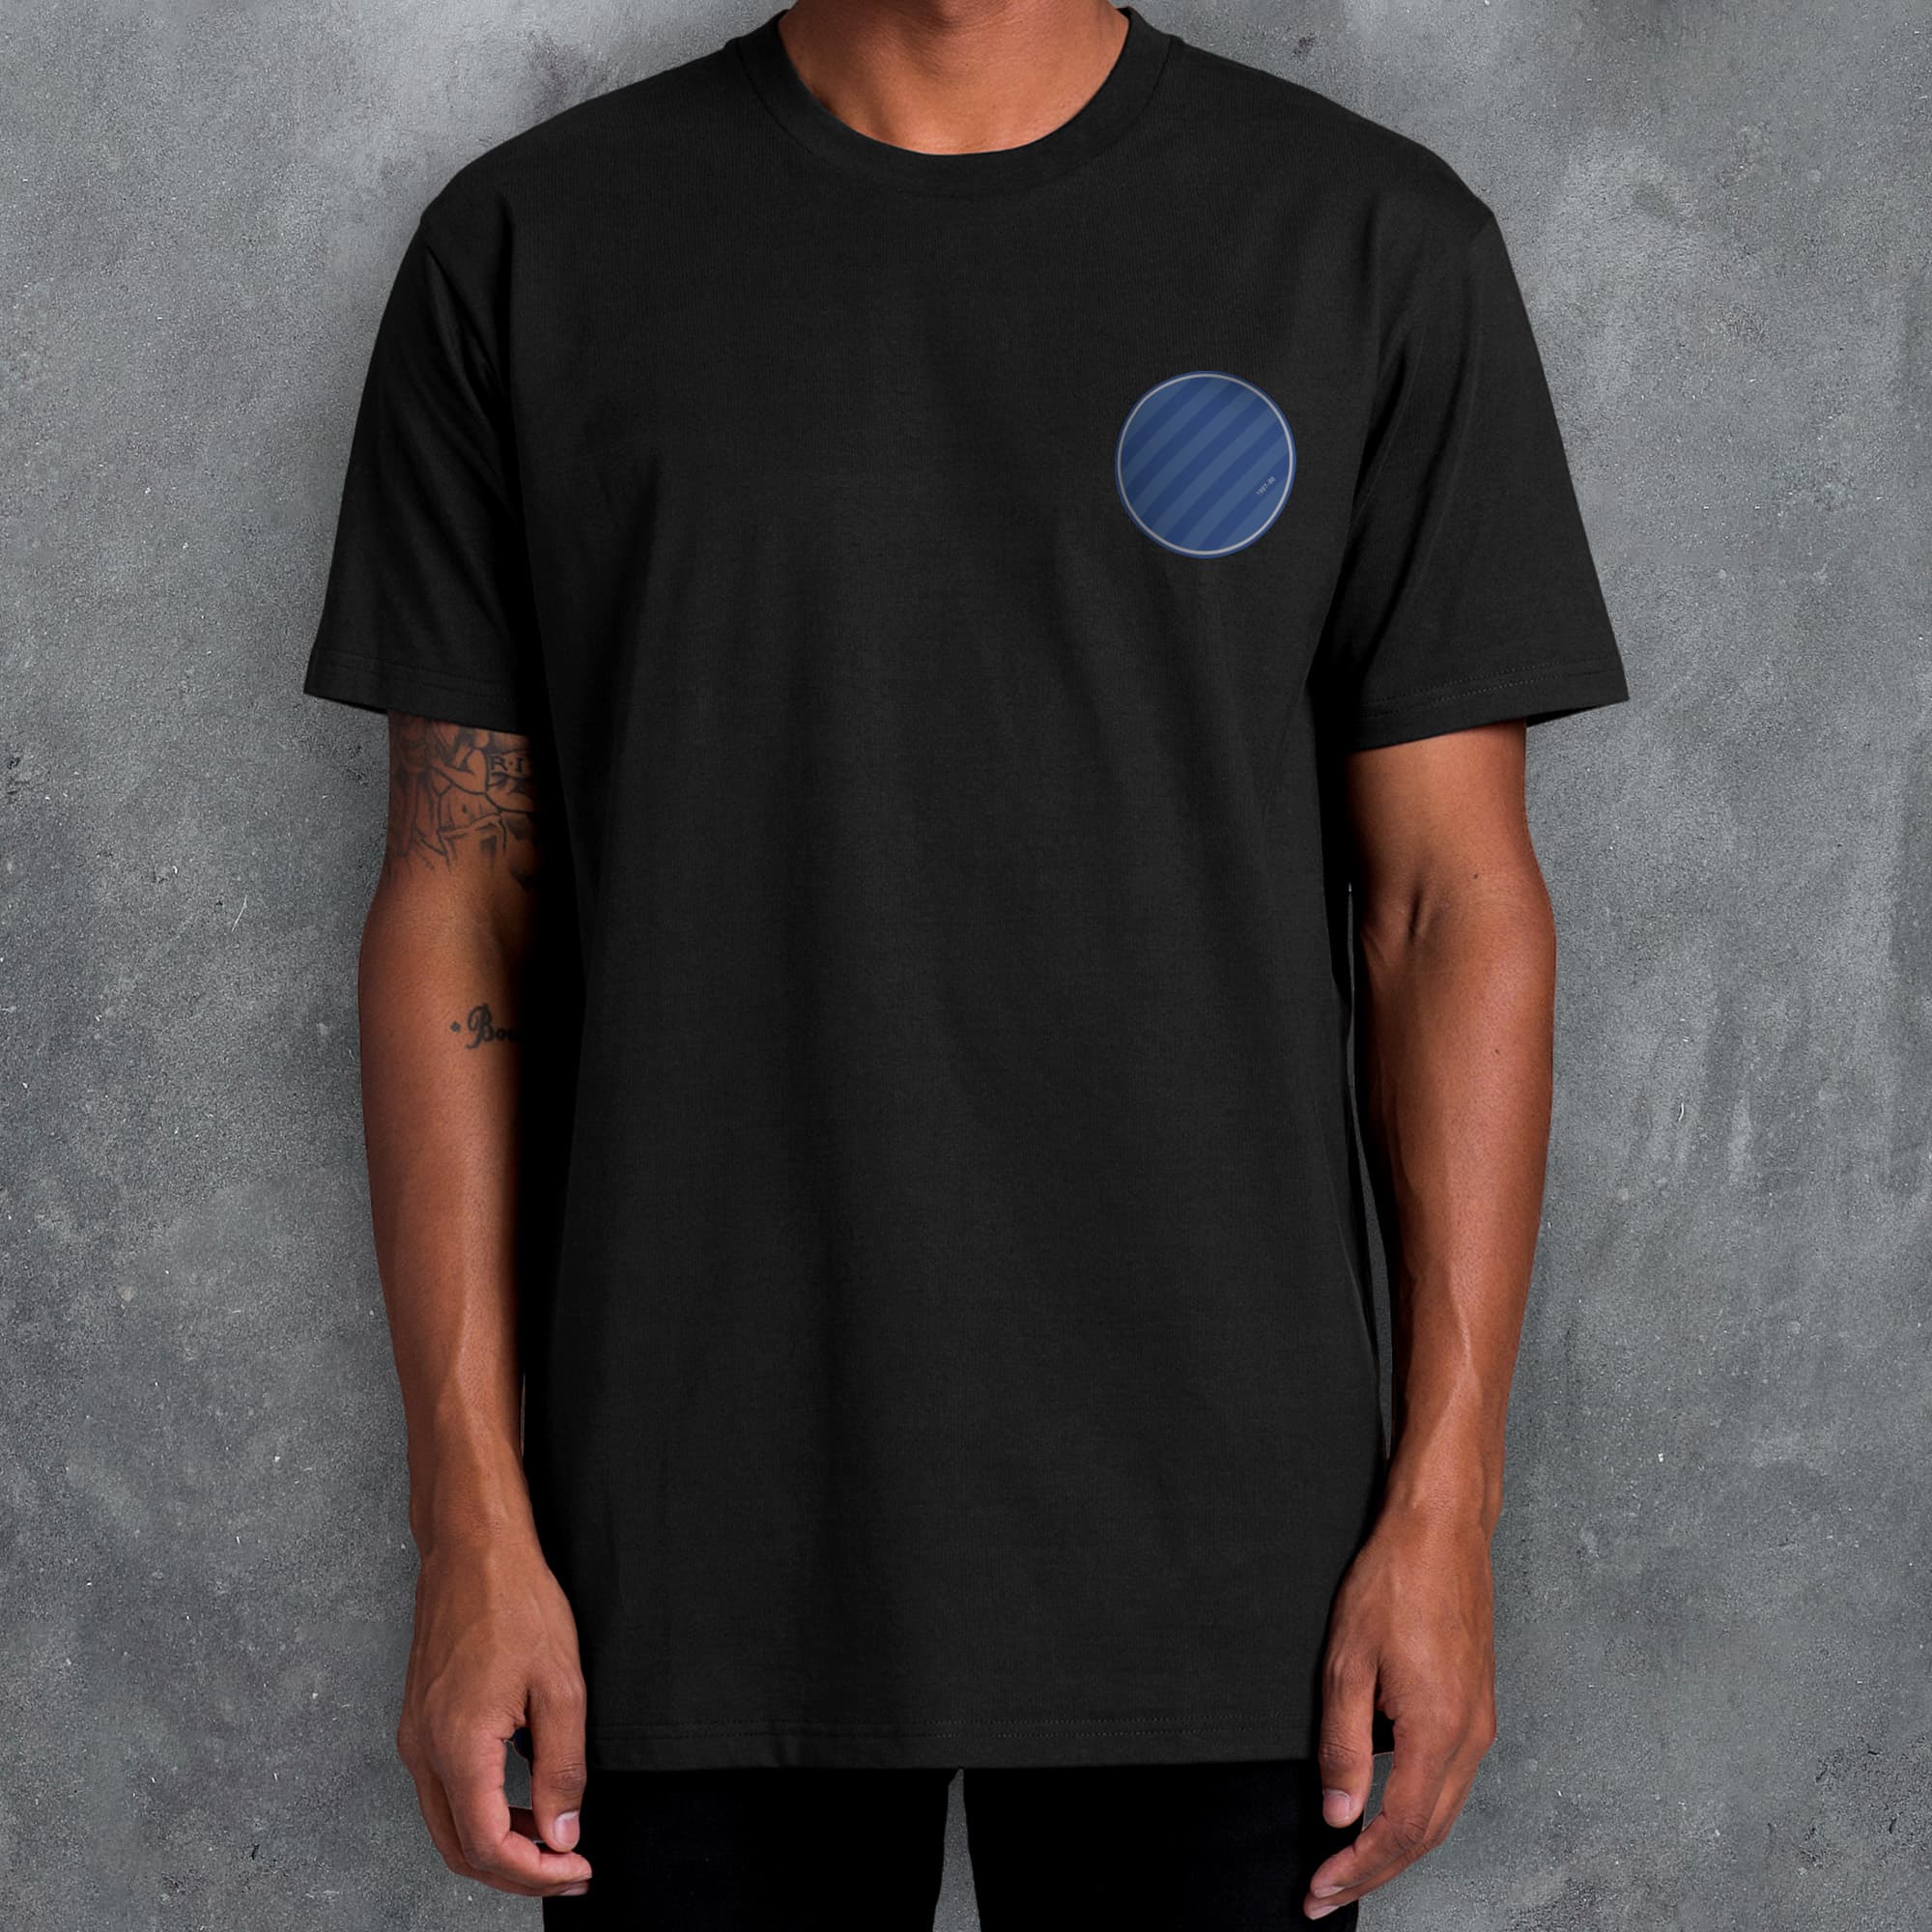 a man wearing a black shirt with a blue circle on it